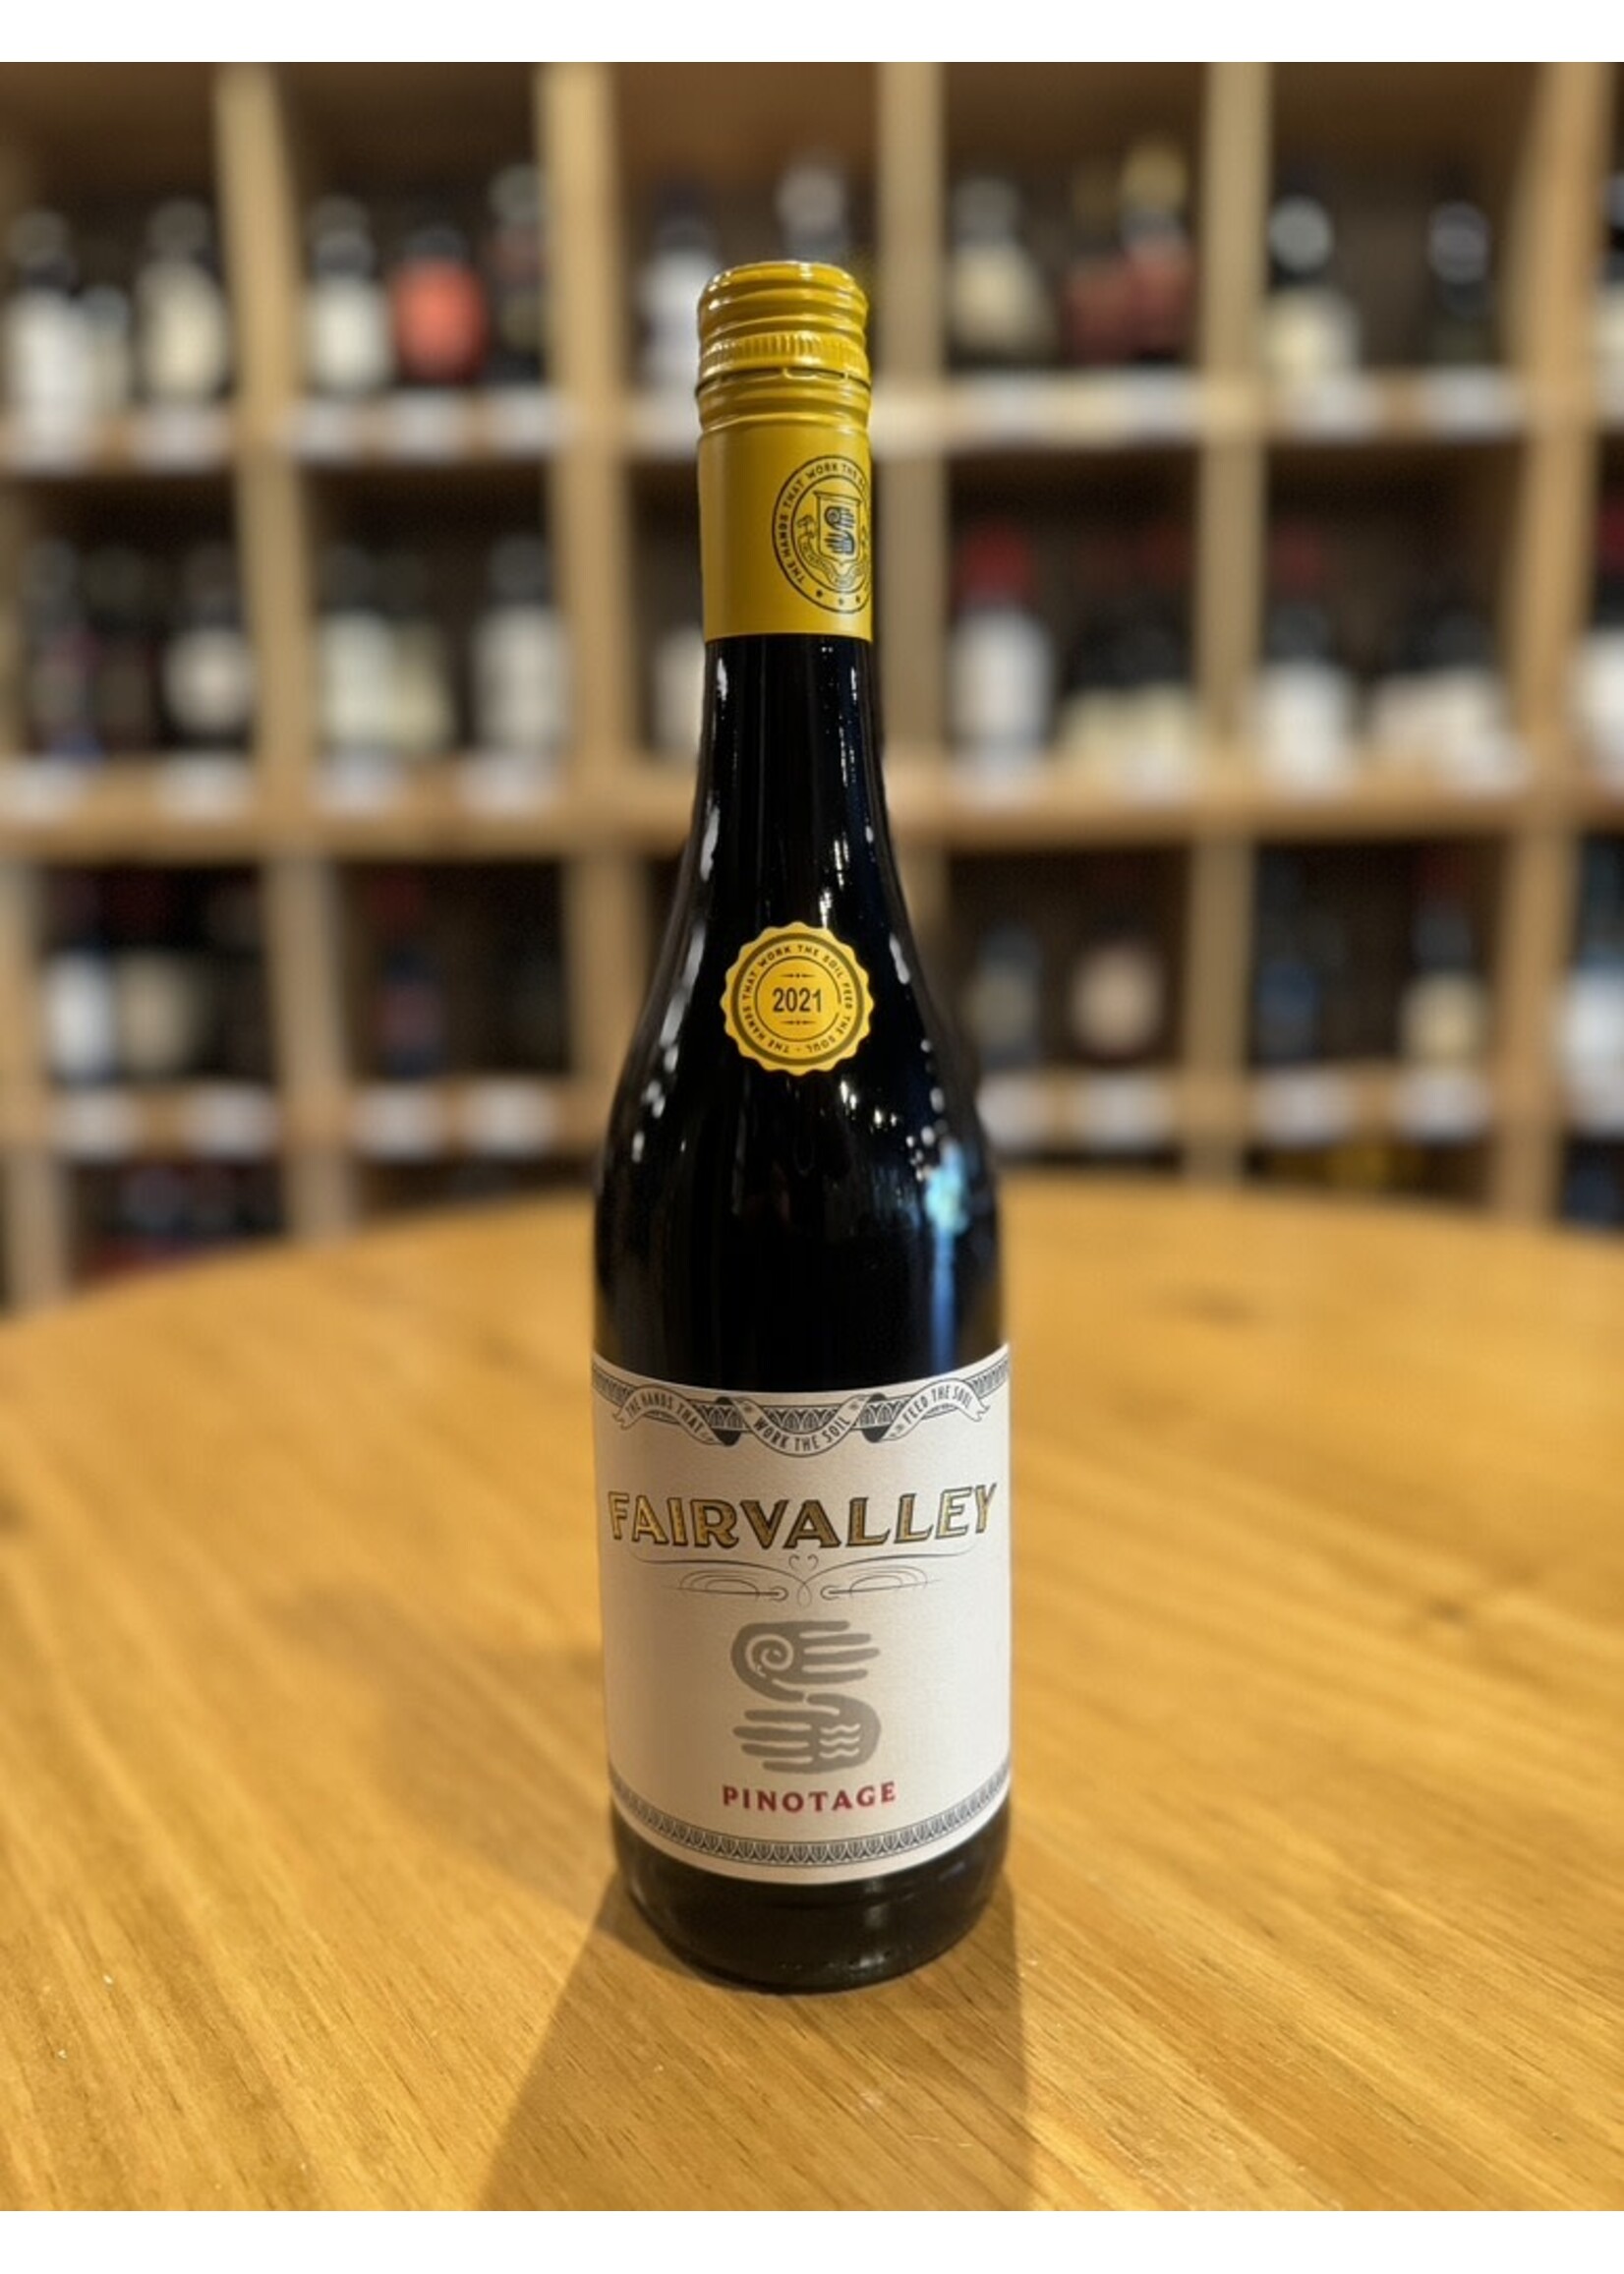 Fairvalley Pinotage 2021